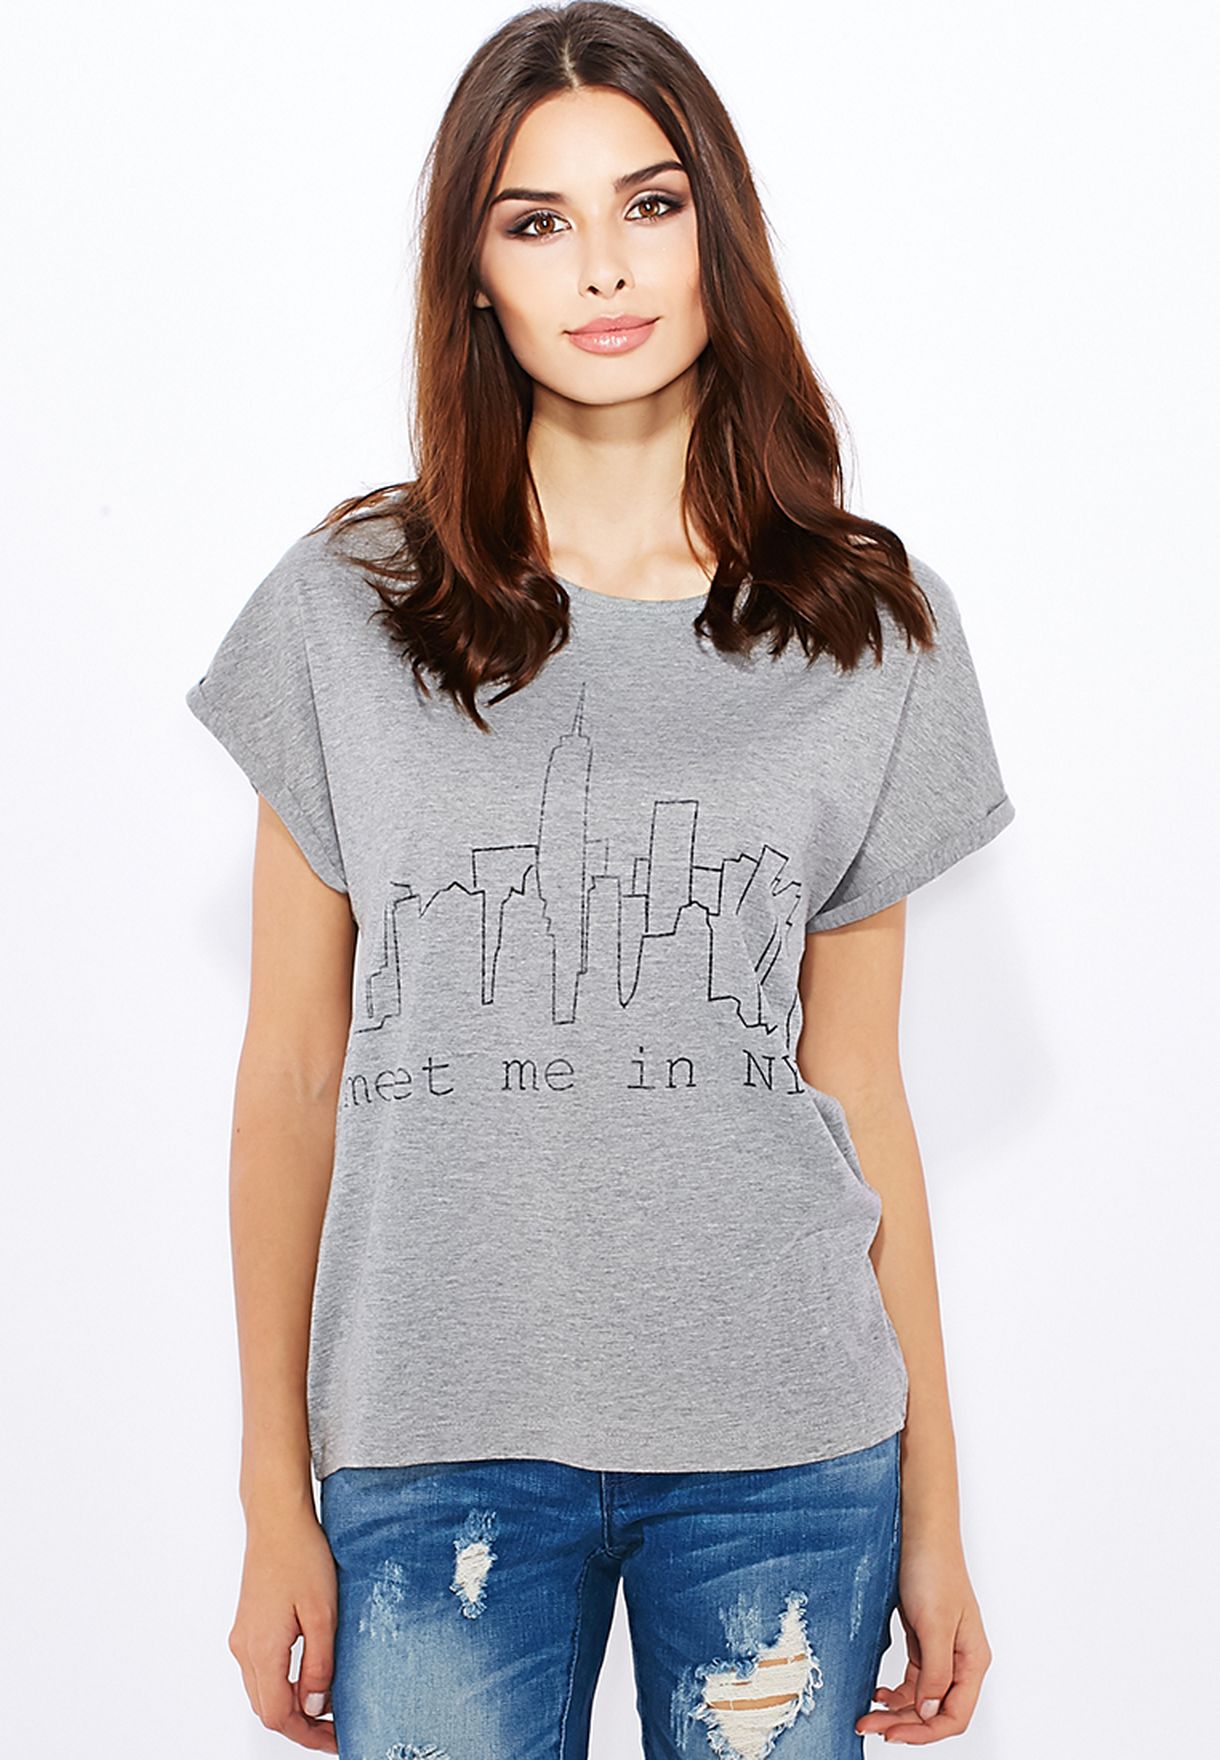 Ydeevne Opmærksomhed Implement Buy Vero Moda grey Meet Me In NYC T-Shirt for Women in Manama, other cities  